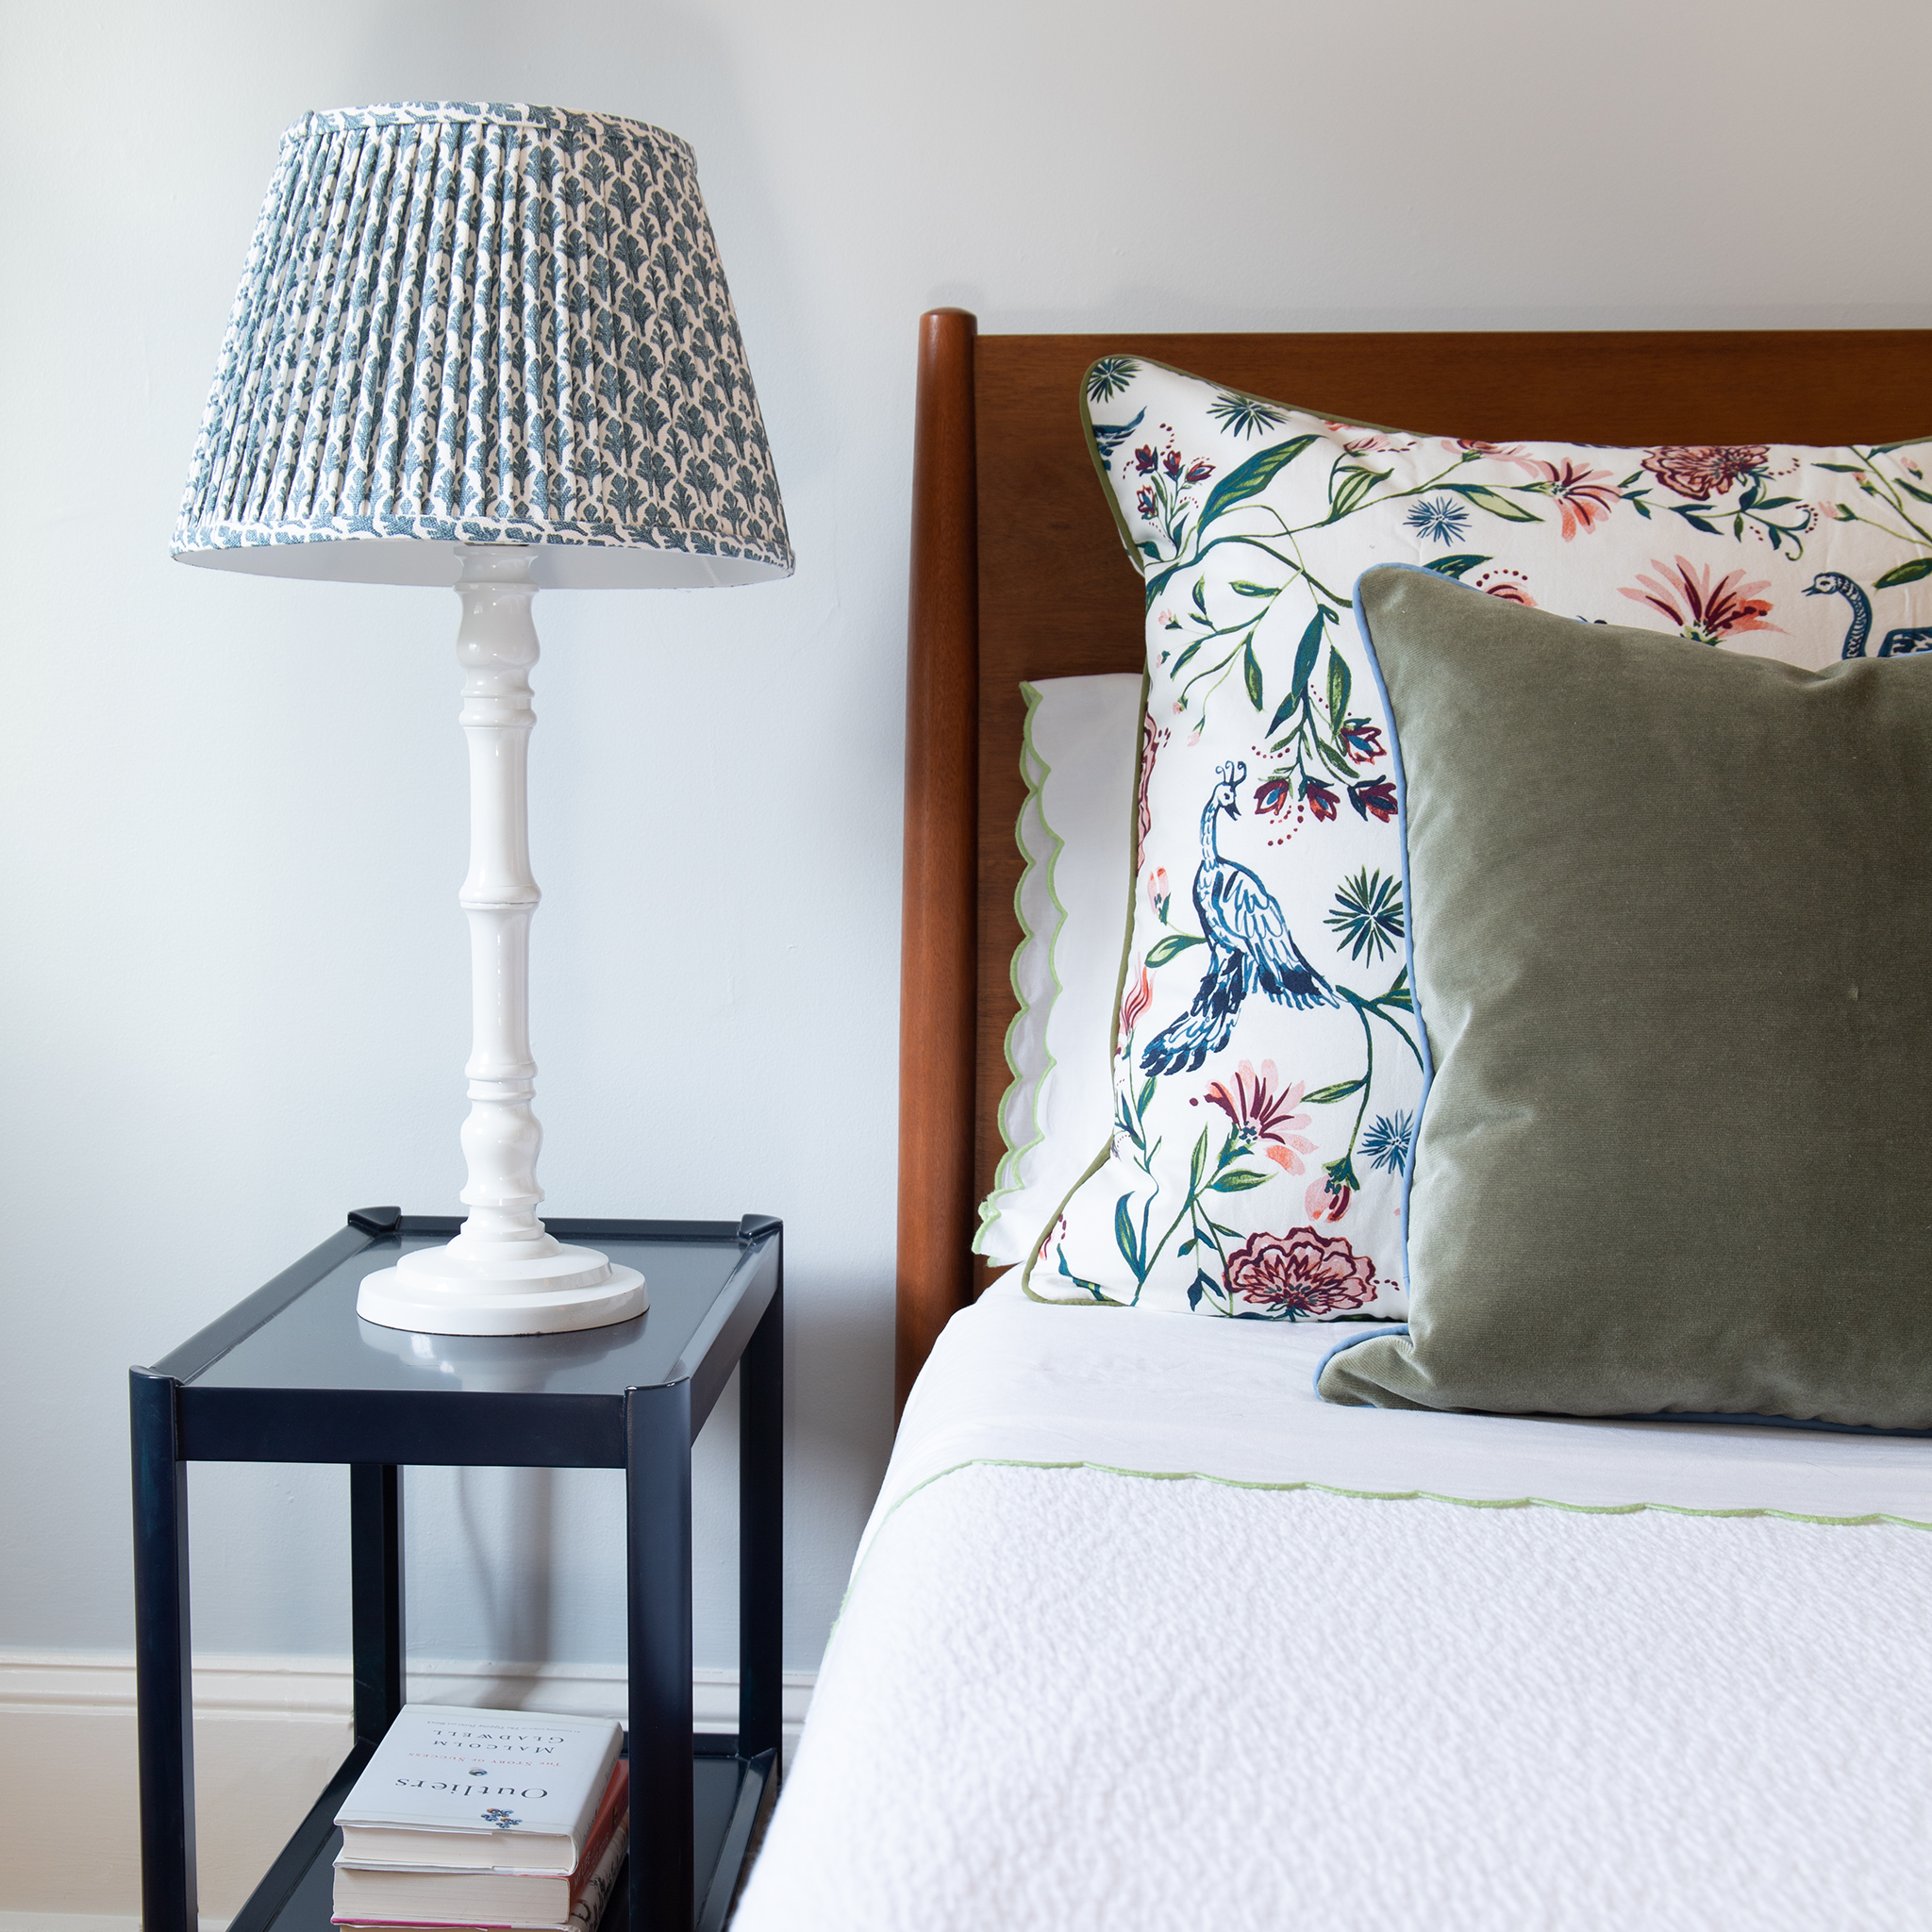 Bedroom styled with white bed with wooden headboard and Cream Chinoiserie and Fern Green Pillows next to navy night stand with white lamp and books stacked underneath